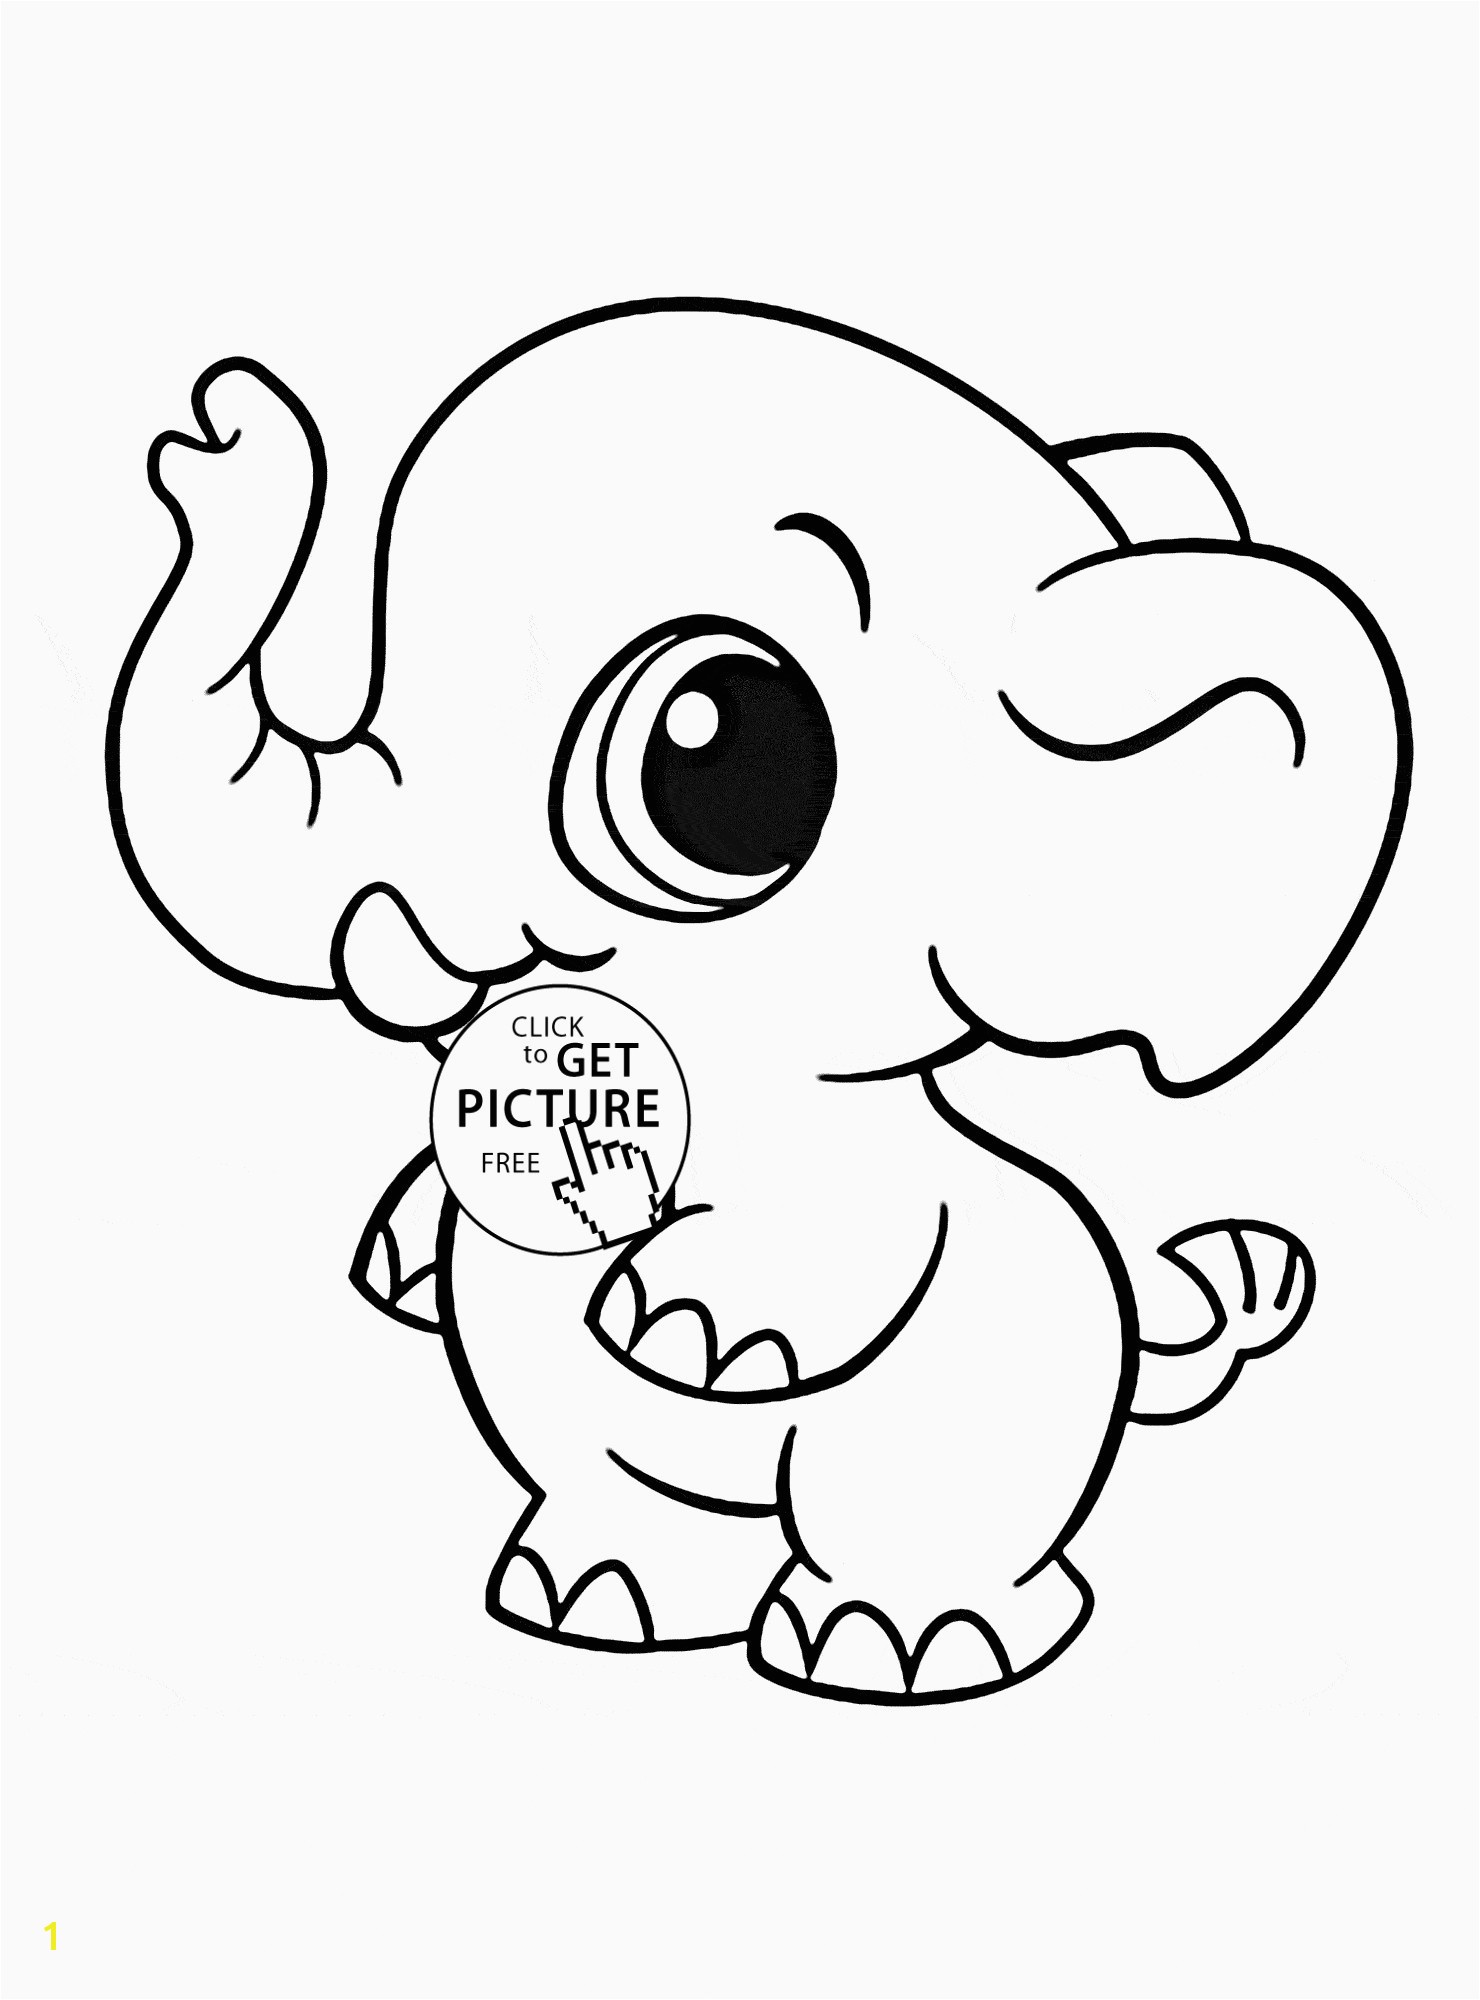 Childrens Coloring Pages Of Animals Awesome Animal Coloring Sheet Gallery